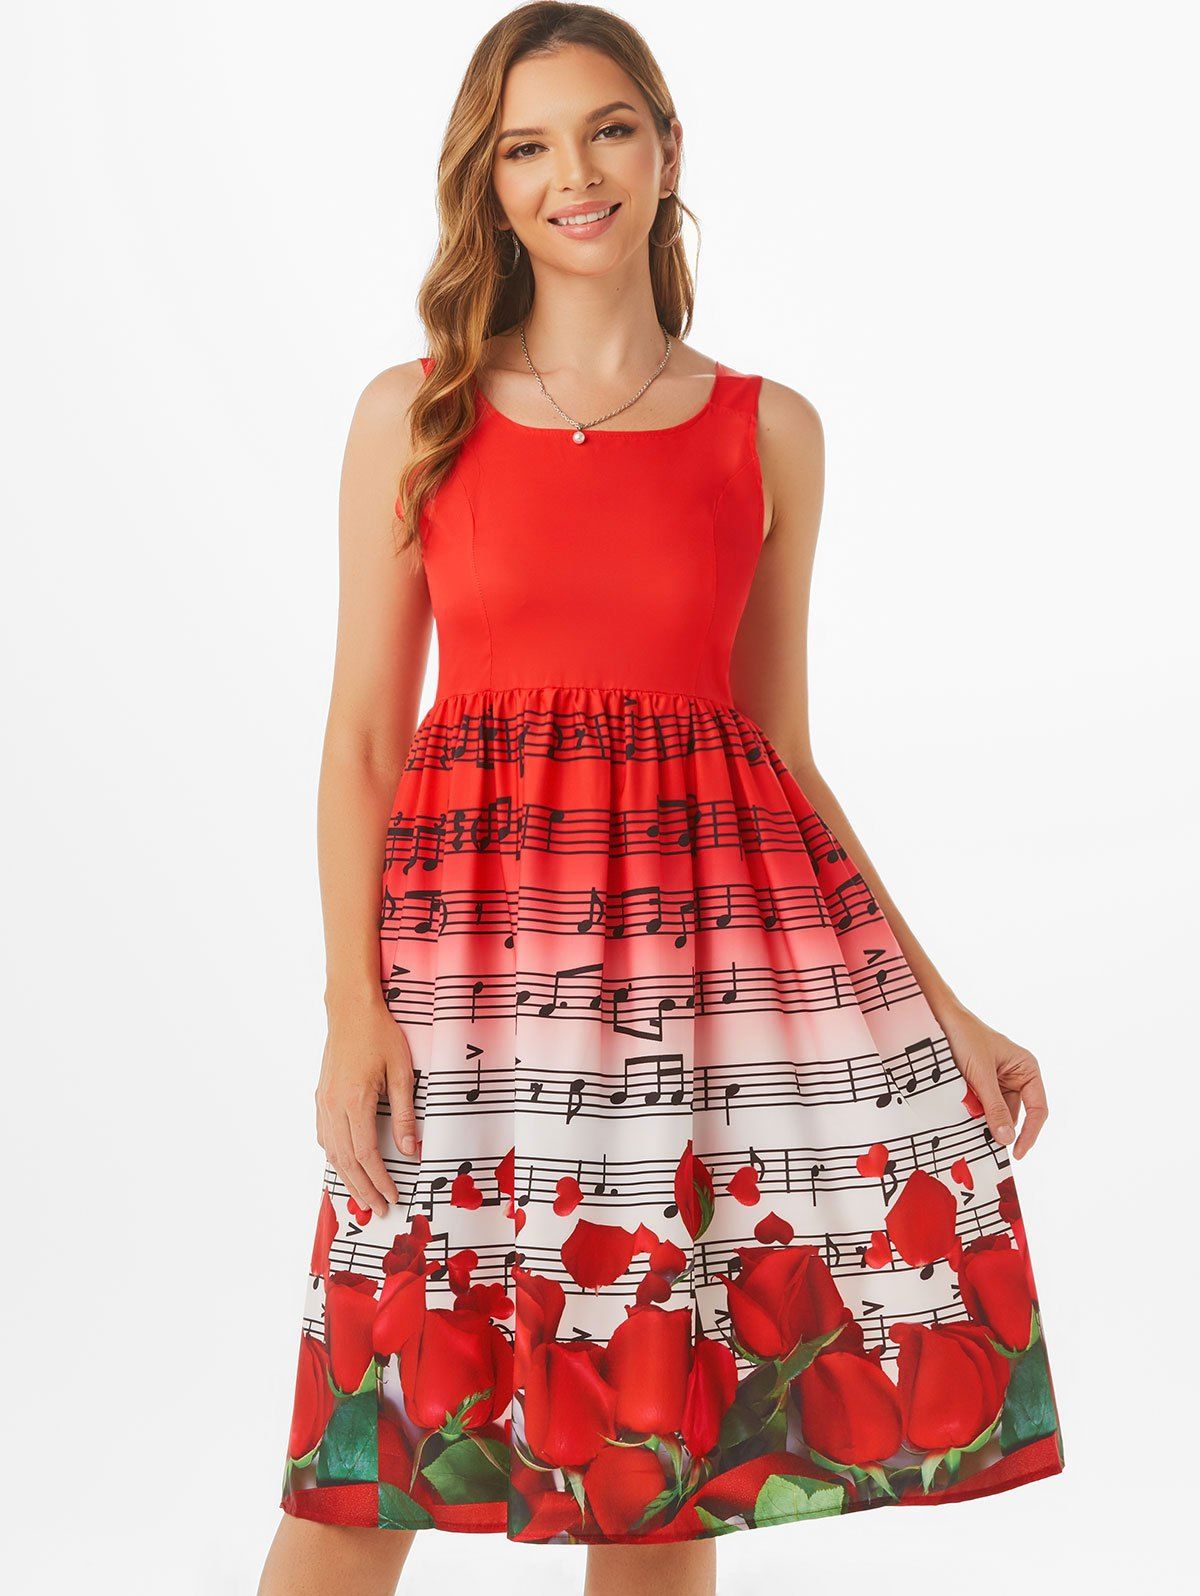 Musical Note Floral Heart Print Sleeveless Dress - multicolor XL